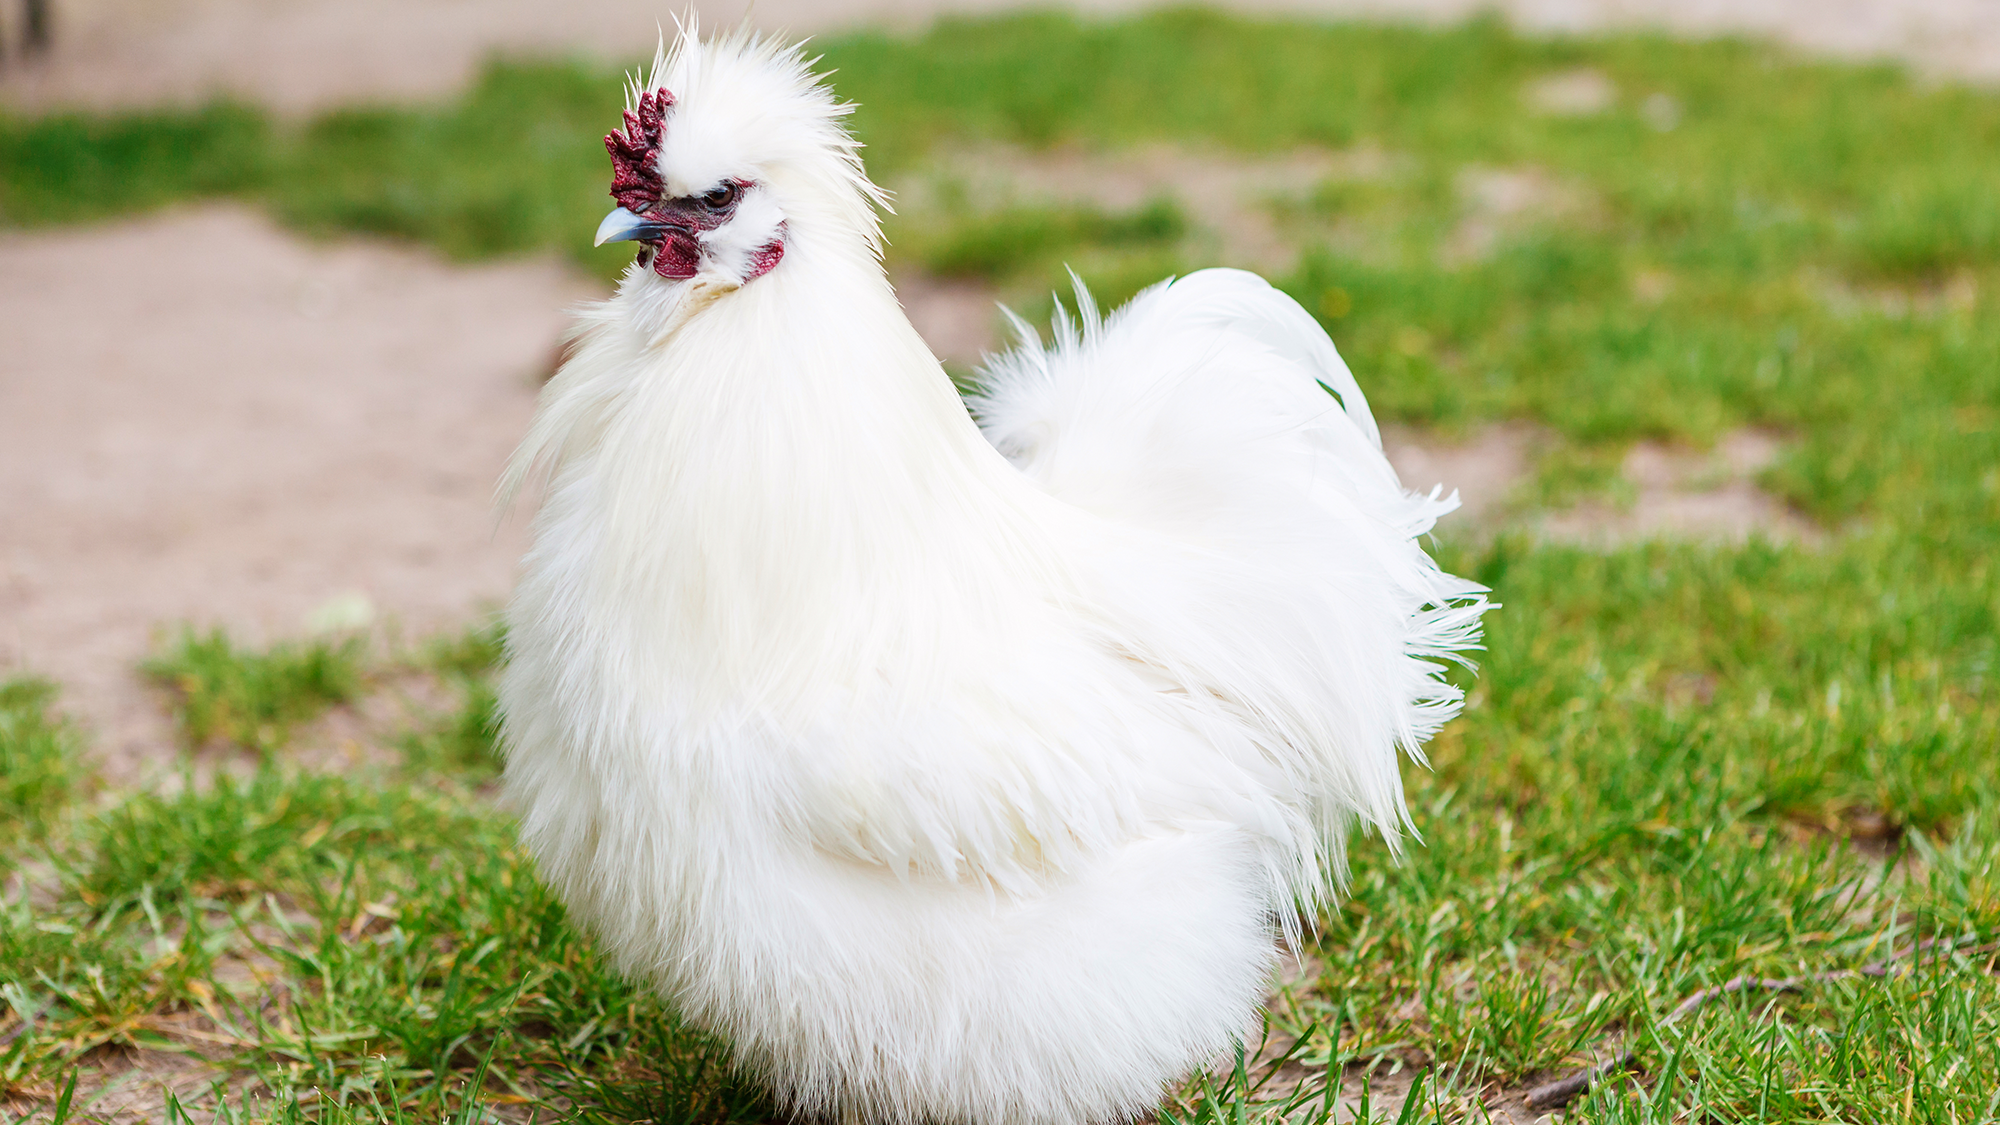 Before humans ate chickens, we treasured them as exotic pets